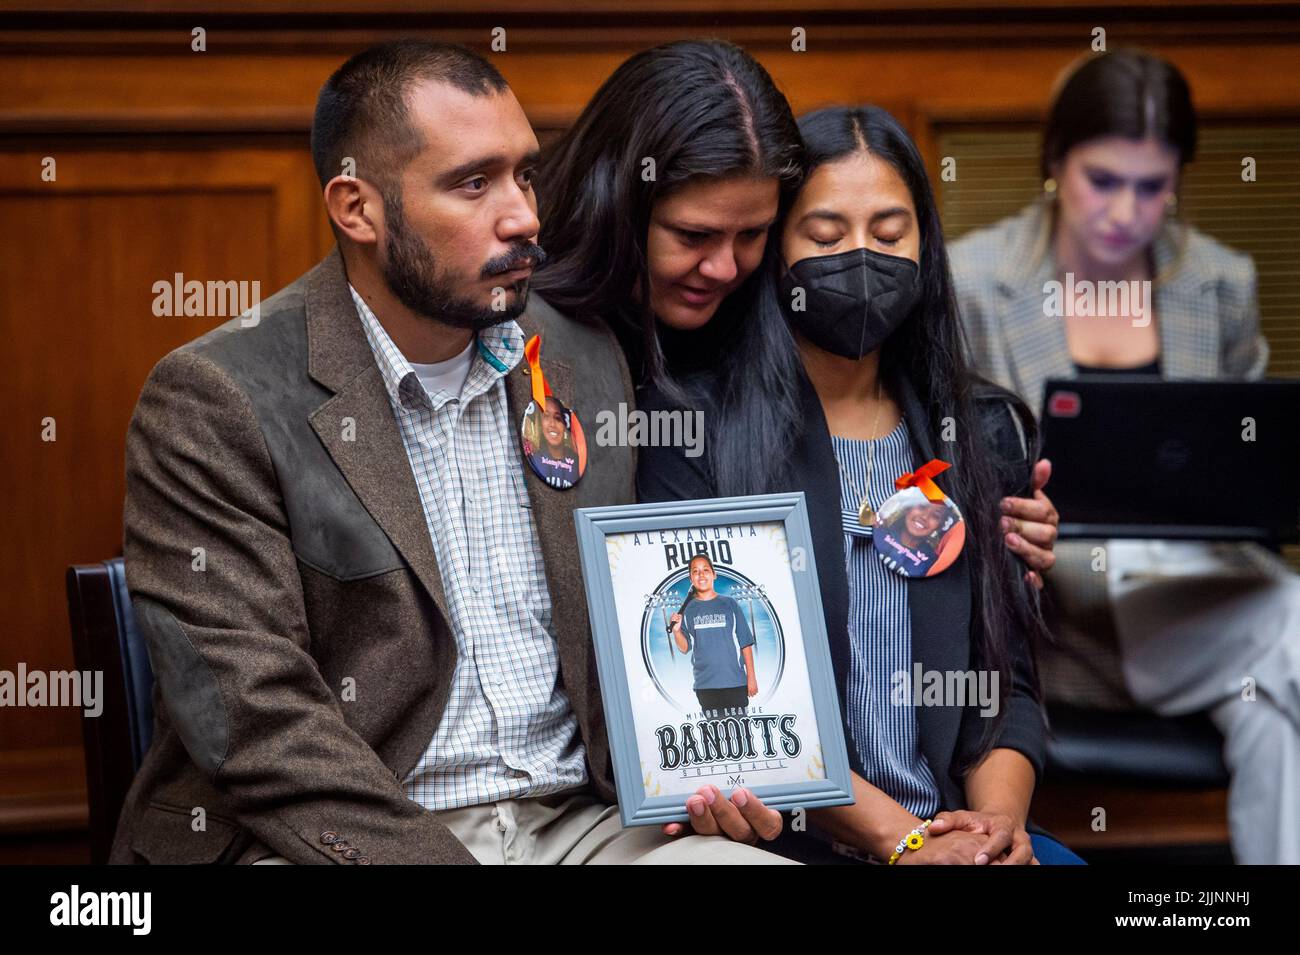 Gloria Cazares, center, whose nine year-old daughter Jacklyn was one of the children killed by a gunman at Robb Elementary School in Uvalde, Texas, comforts Felix Rubio, left, and Kimberly Rubio, right, whose daughter Alexandria Rubio was one of the children killed by a gunman at Robb Elementary School in Uvalde, Texas, during a House Committee on Oversight and Reform hearing “Examining the Practices and Profits of Gun Manufacturers” in the Rayburn House Office Building in Washington, DC, July 27, 2022. Credit: Rod Lamkey/CNP /MediaPunch Stock Photo